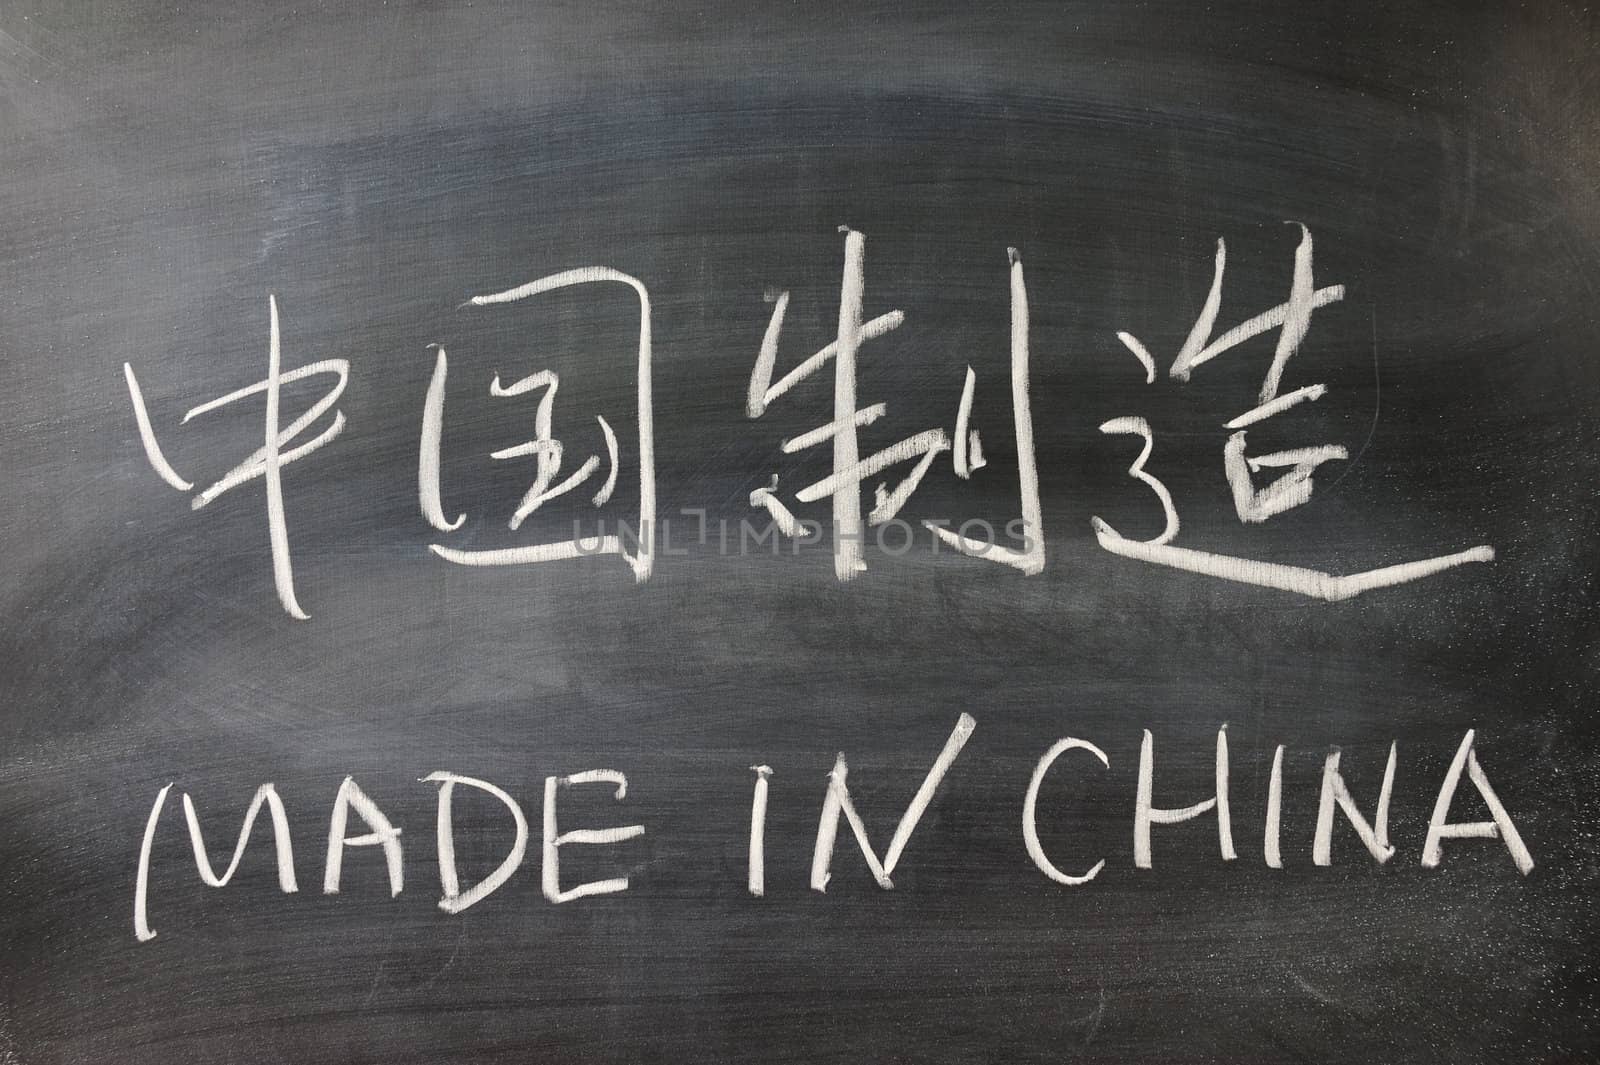 Bilingual "Made in China" words in Chinese and English written on the blackboard